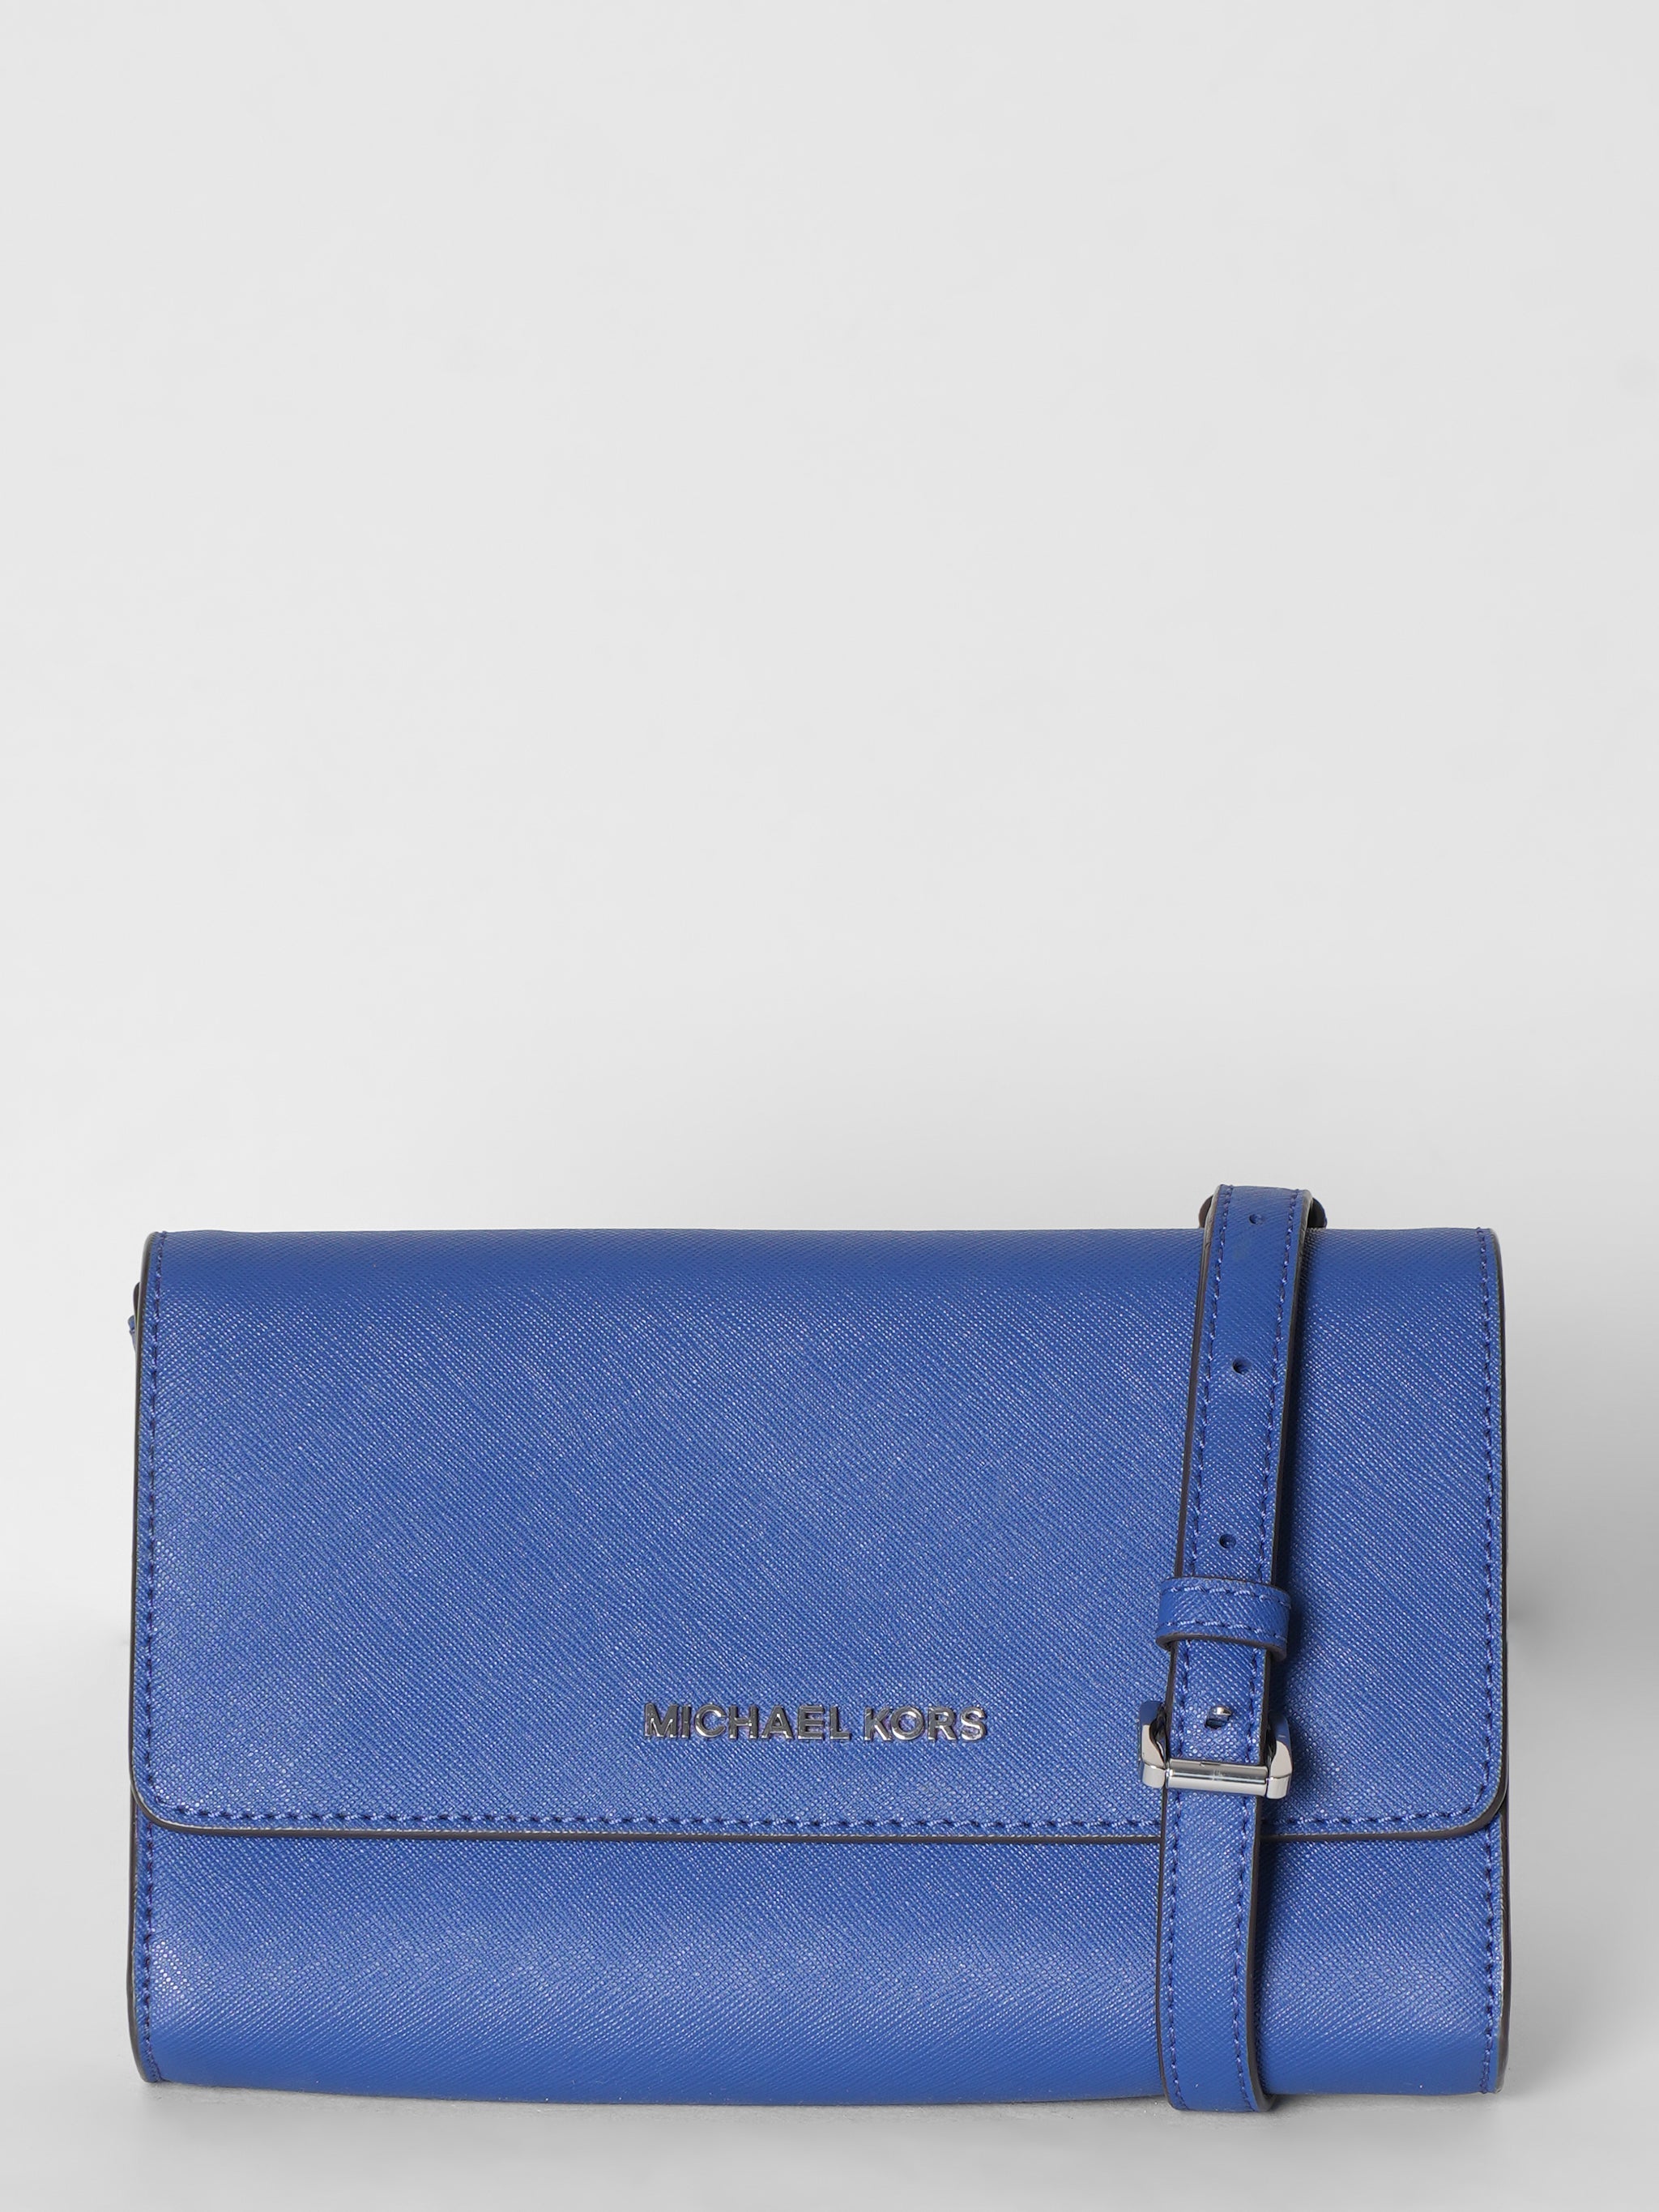 Michael kors Royal Blue Sling Bag With A Card Sling Pouch